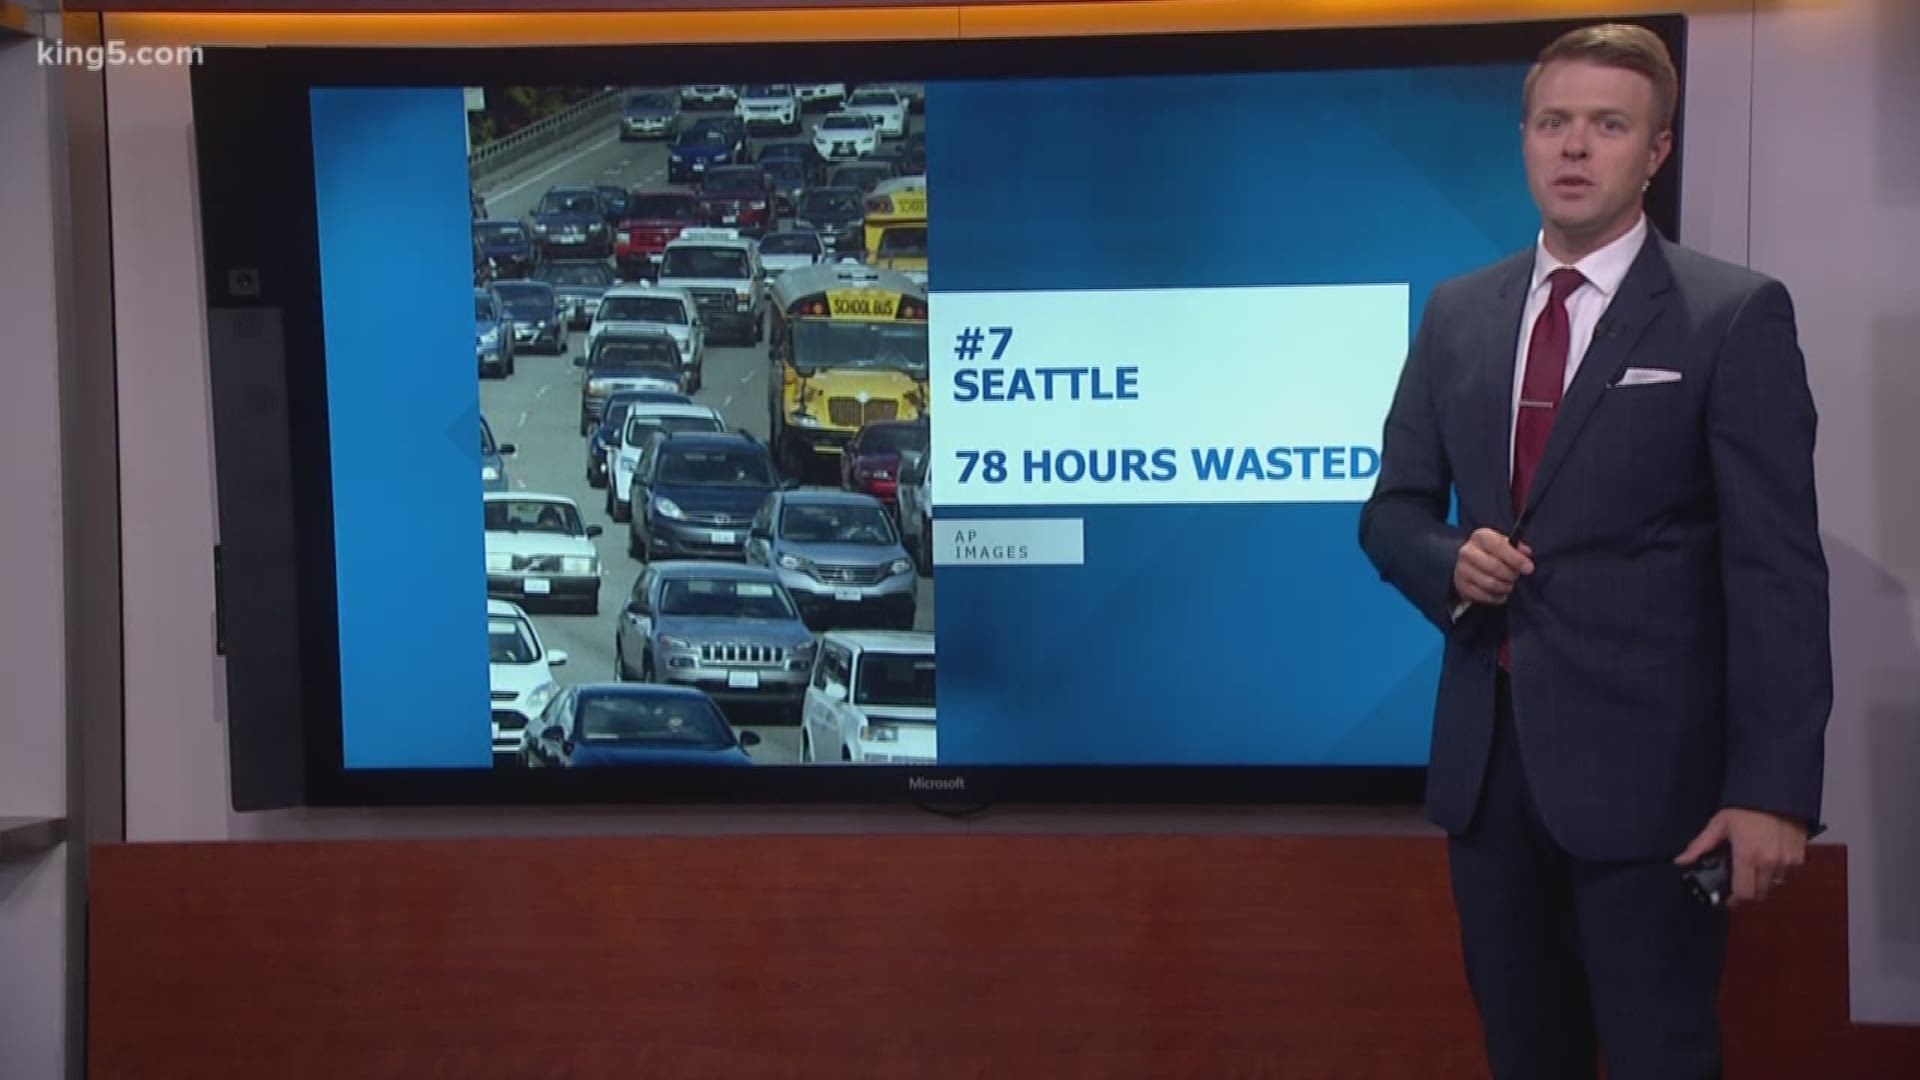 The average commuter wastes 78 hours of their lives annually sitting in Seattle traffic.